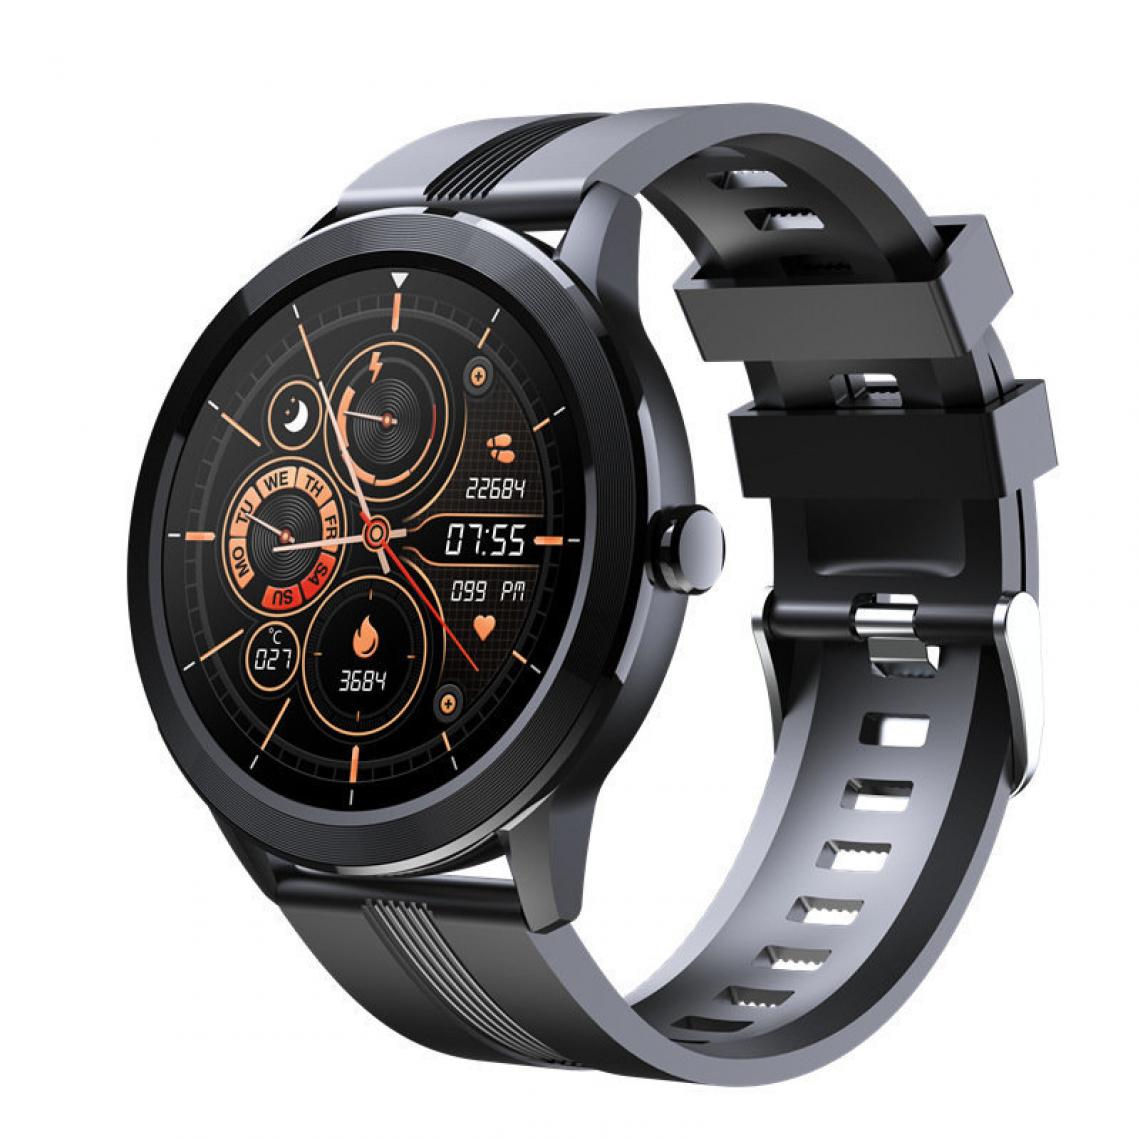 Chronotech Montres - Chronus Men's Smartwatch, 24 Modes Sport Smart Watch, acve Fitness Trackers Heart Rate Monitor Sleep GPS, IP67 Waterproof Smartwatch with Pedometer for iOS Android(black) - Montre connectée